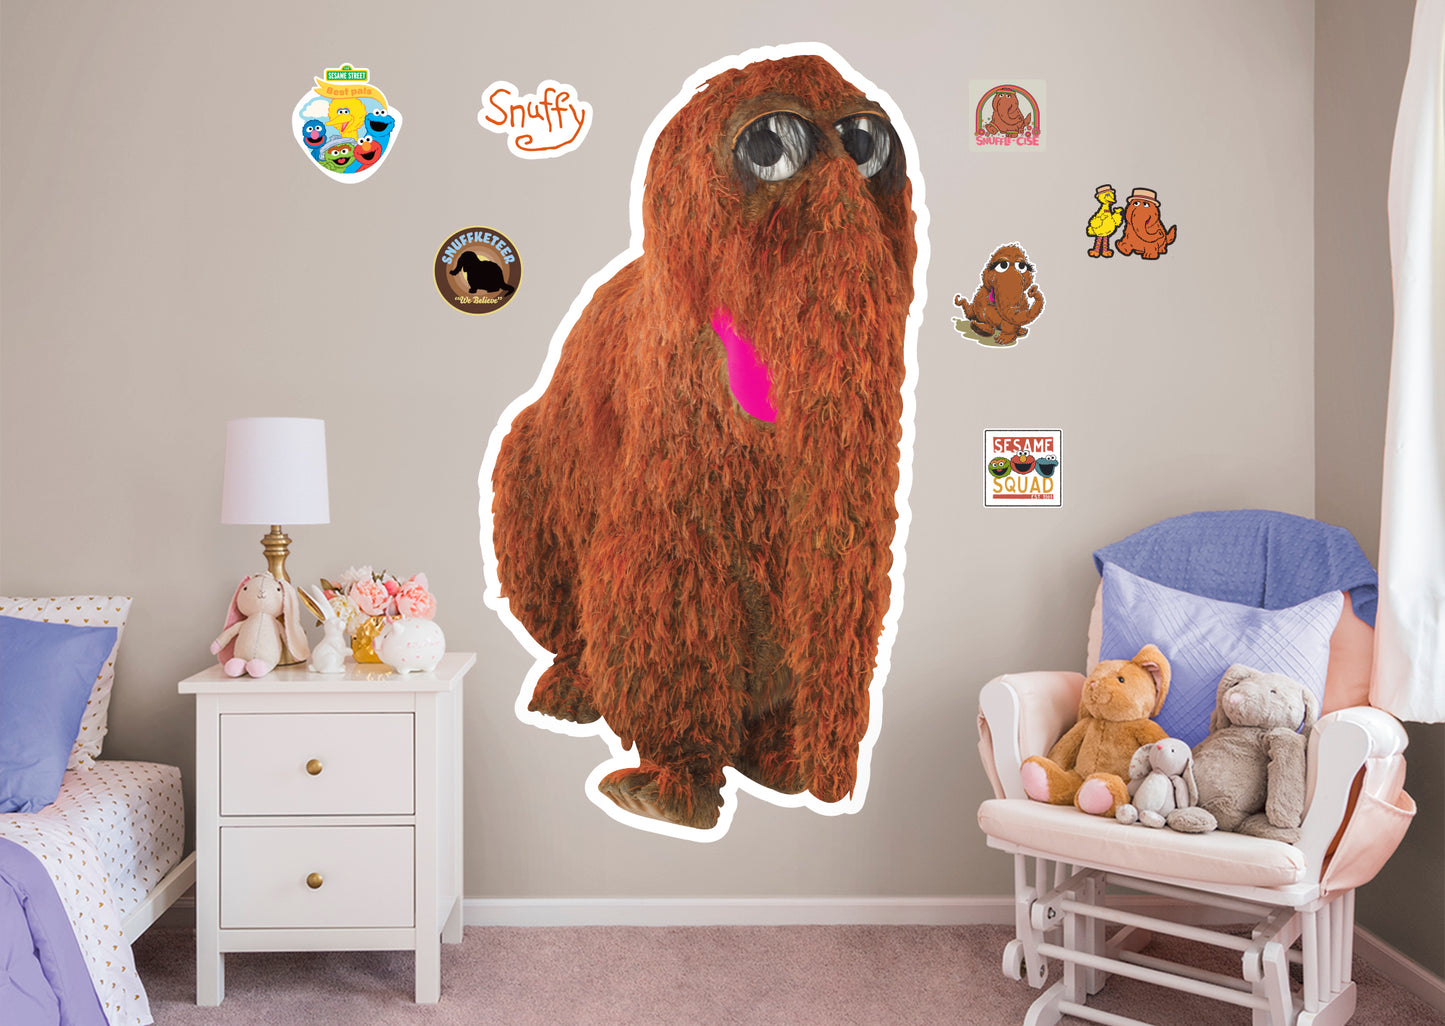 Snuffleupagus RealBig        - Officially Licensed Sesame Street Removable     Adhesive Decal